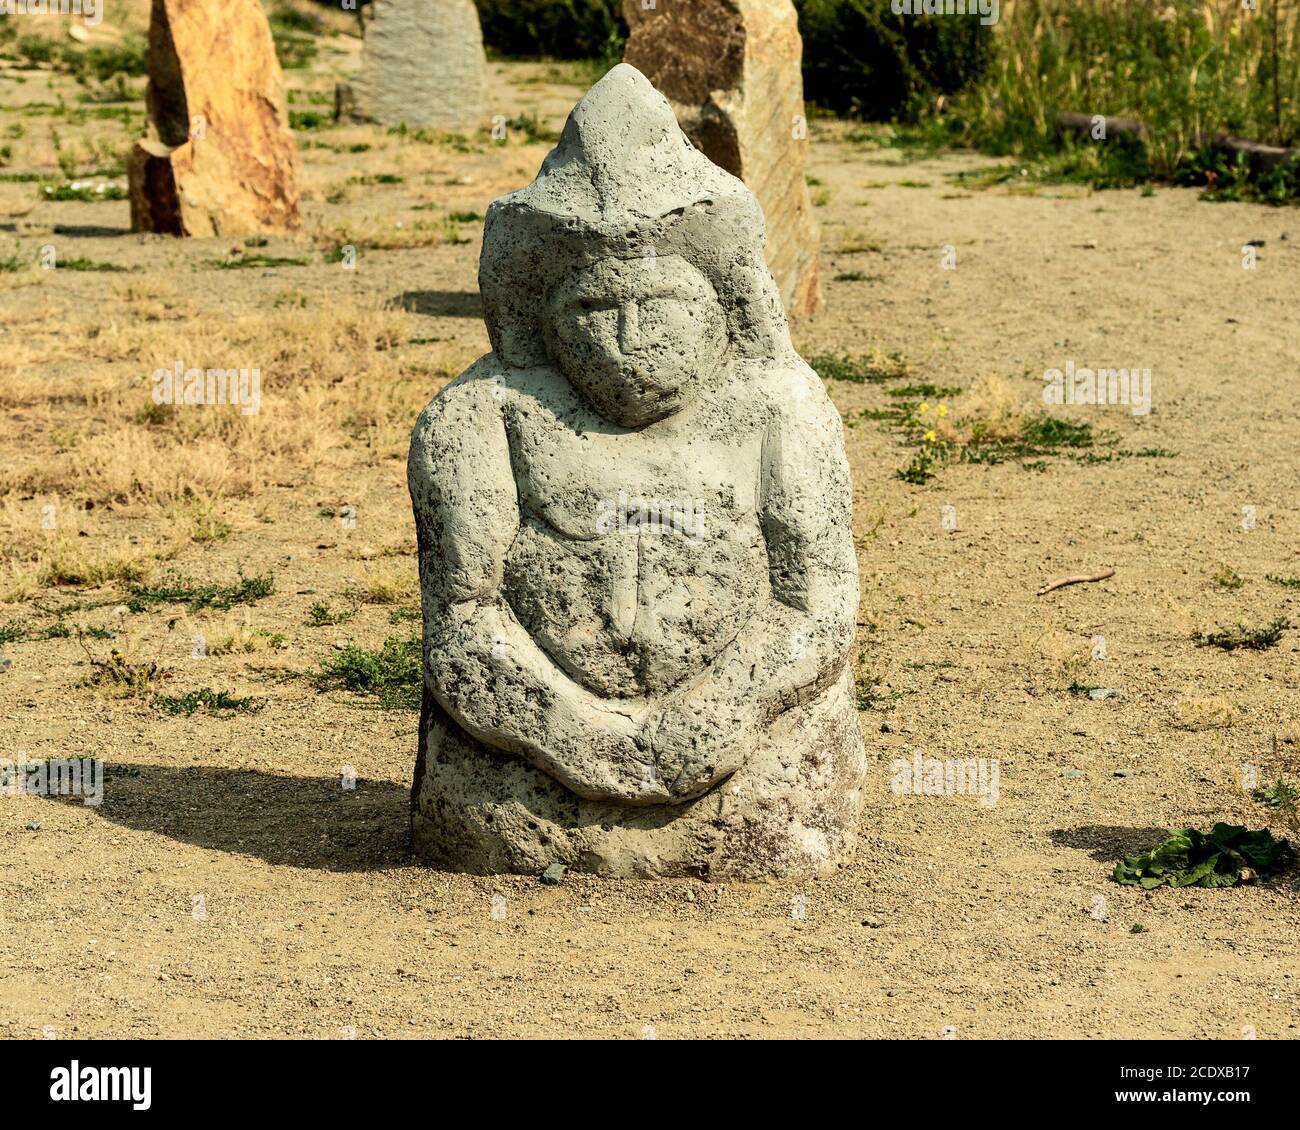 A stone anthropomorphic statue in a clearing. Stock Photo